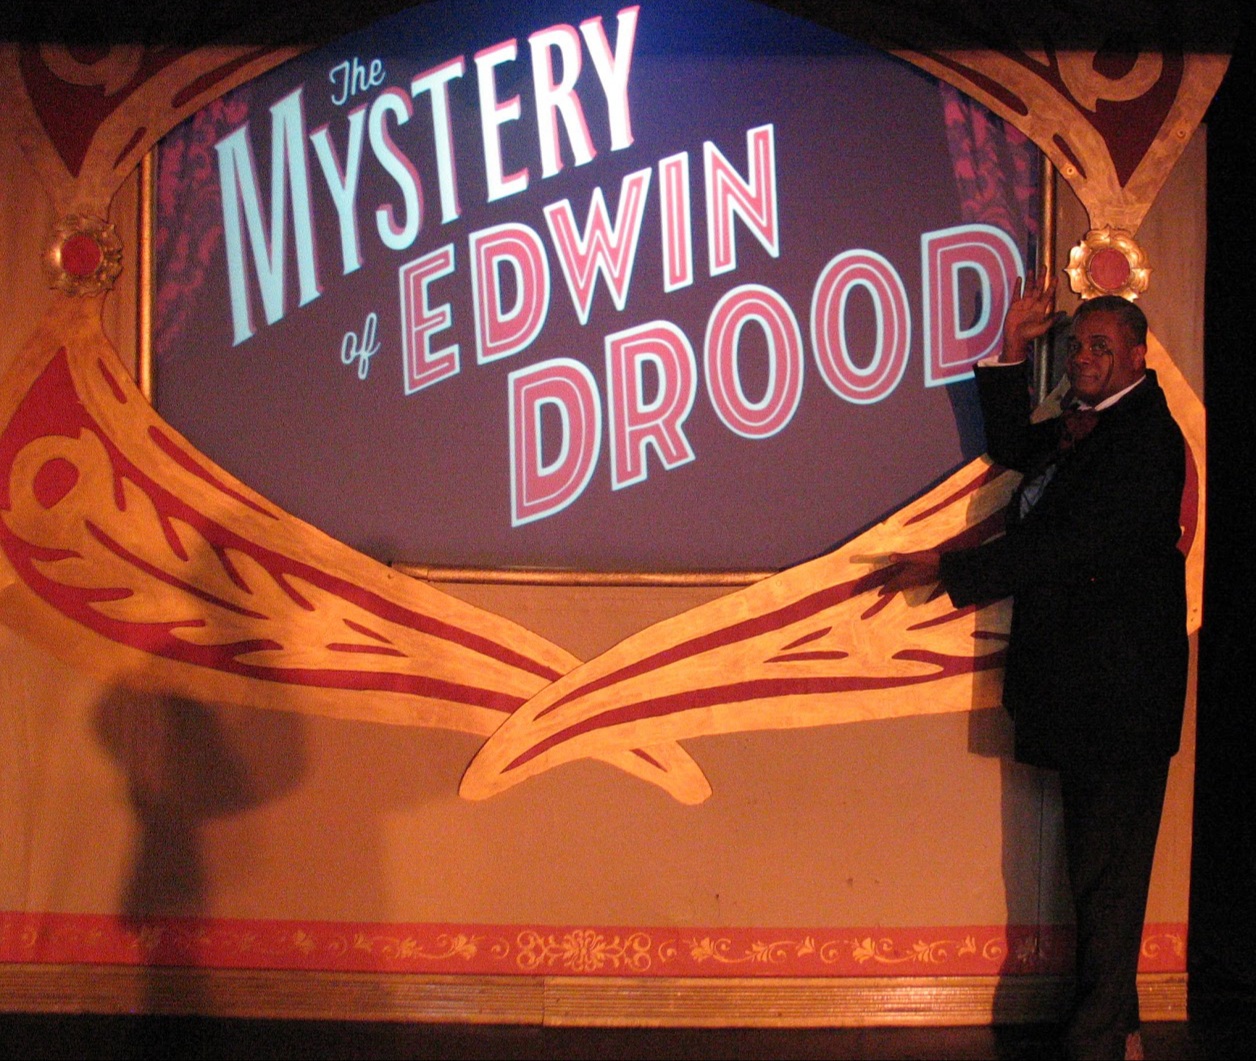 Voting Requested: Darryl Maximilian Robinson received a 2019 Broadwayworld Chicago Award nomination for Best Performer In A Musical or Revue for his work in The Mystery of Edwin Drood.